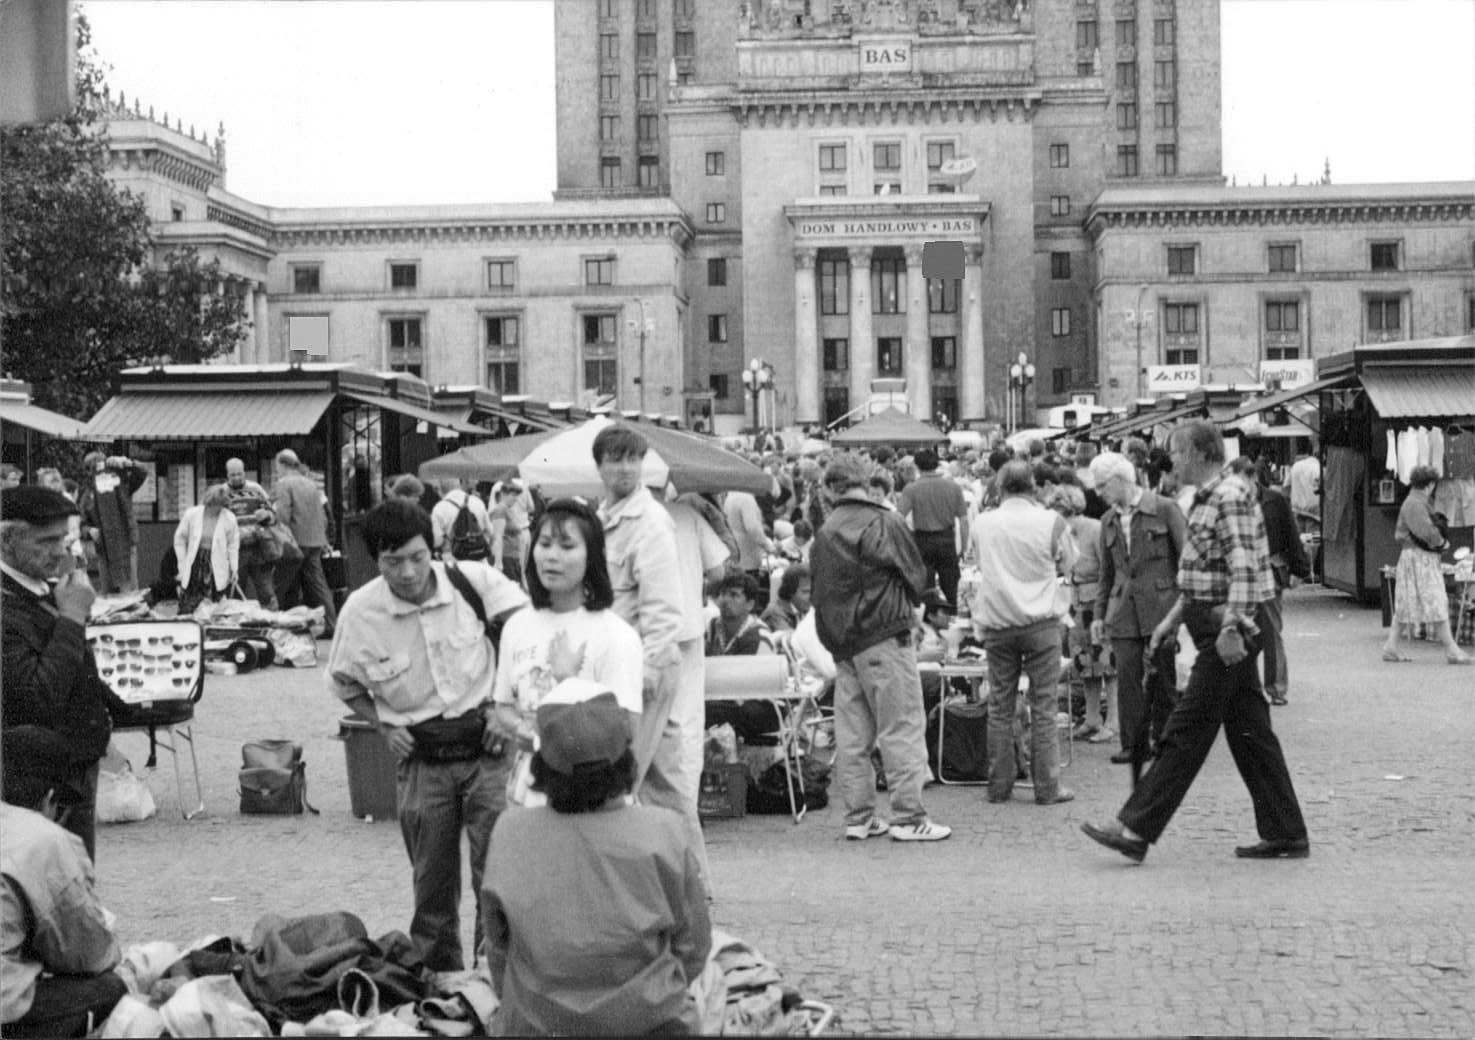 Russian market in front of Palace of Culture, Warsaw, 1990